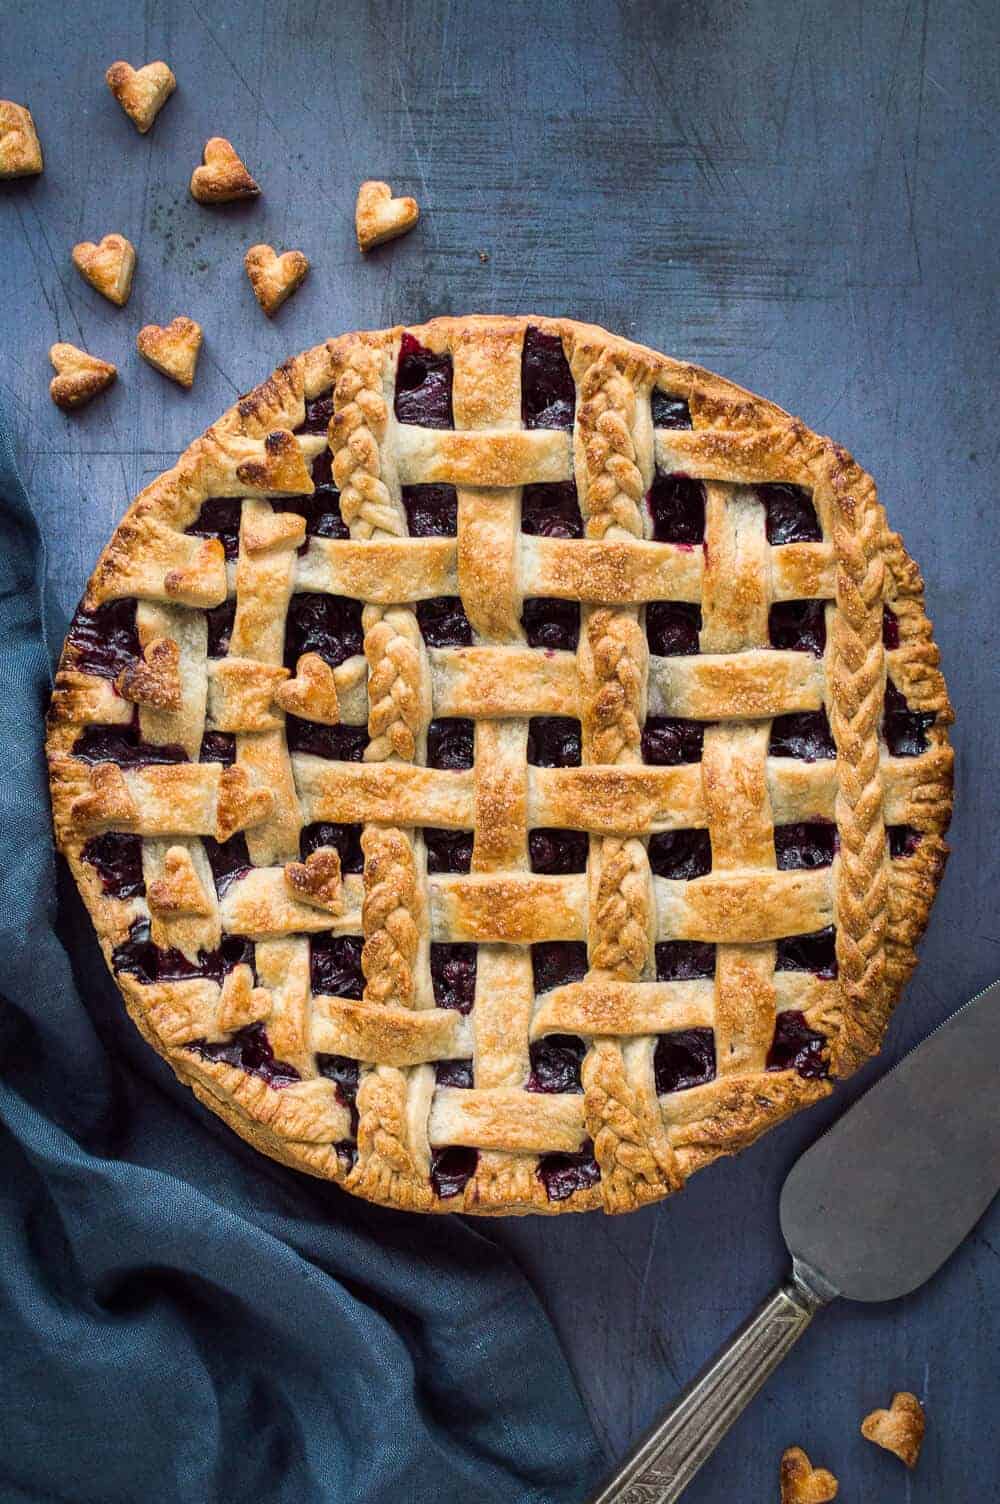 Unsliced baked vegan blueberry pie topped with a coconut oil pastry lattice and pastry braids and hearts.